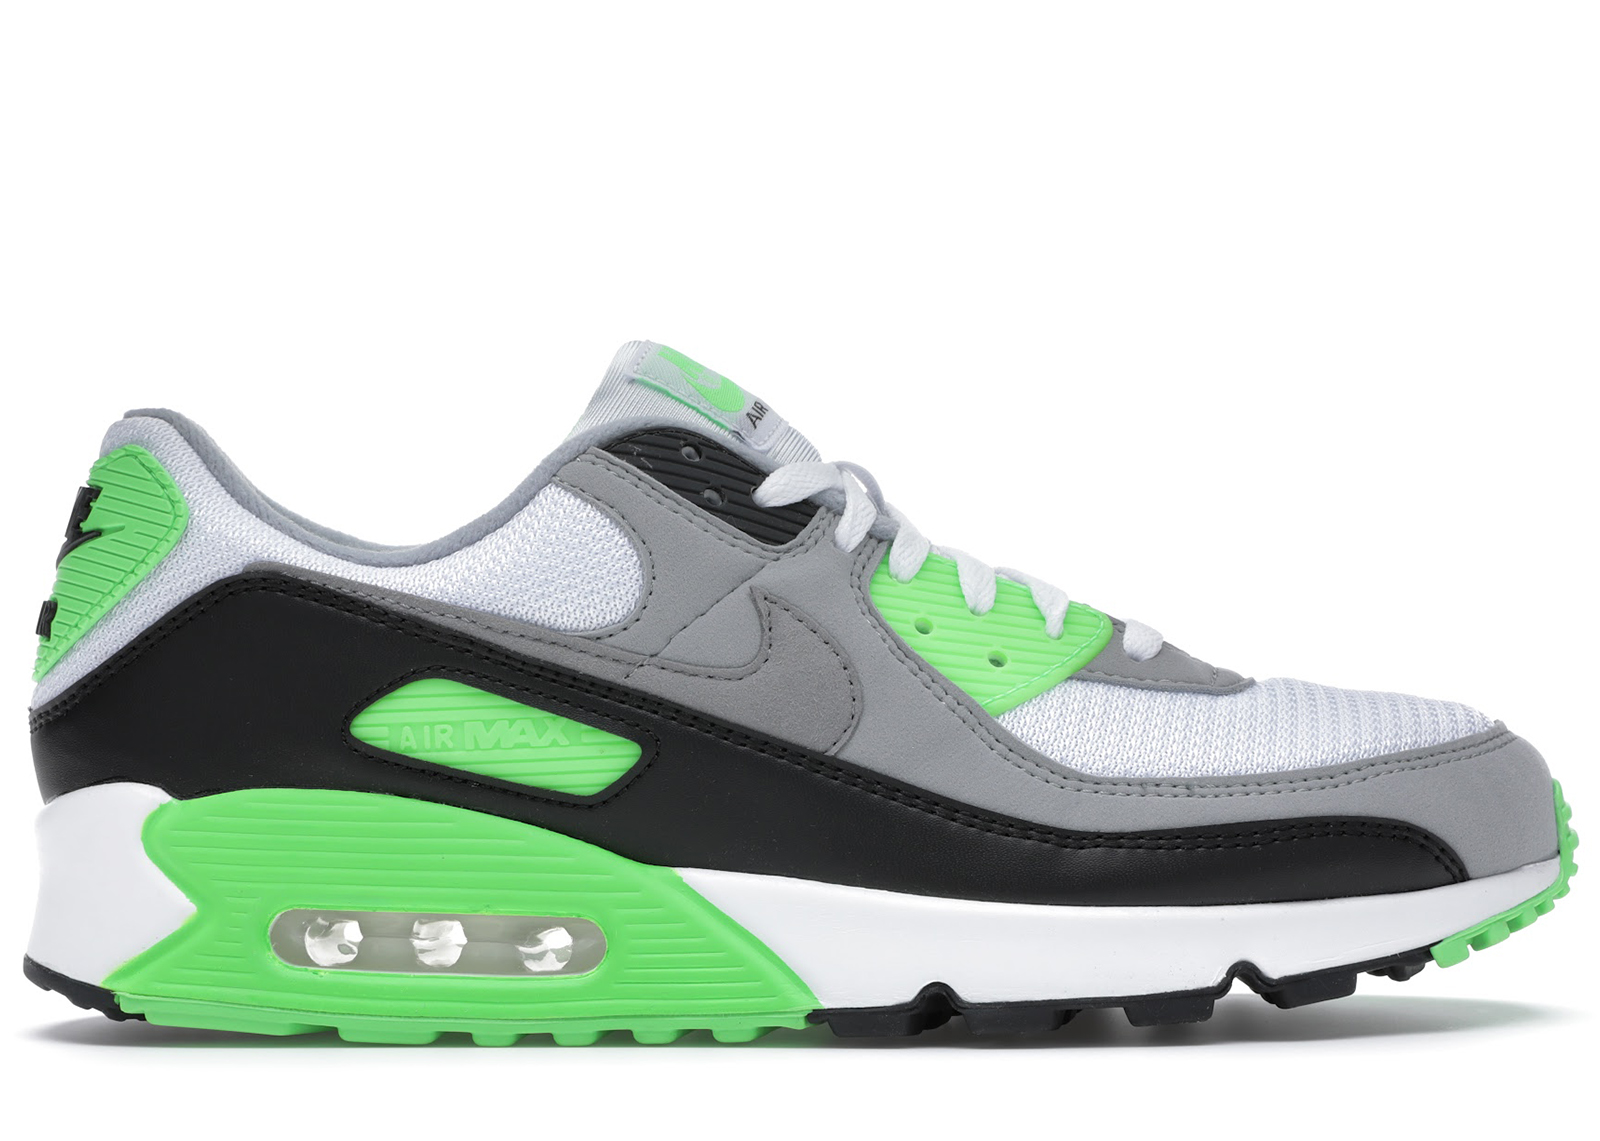 Nike Air Max 90 Shoes - Most Popular